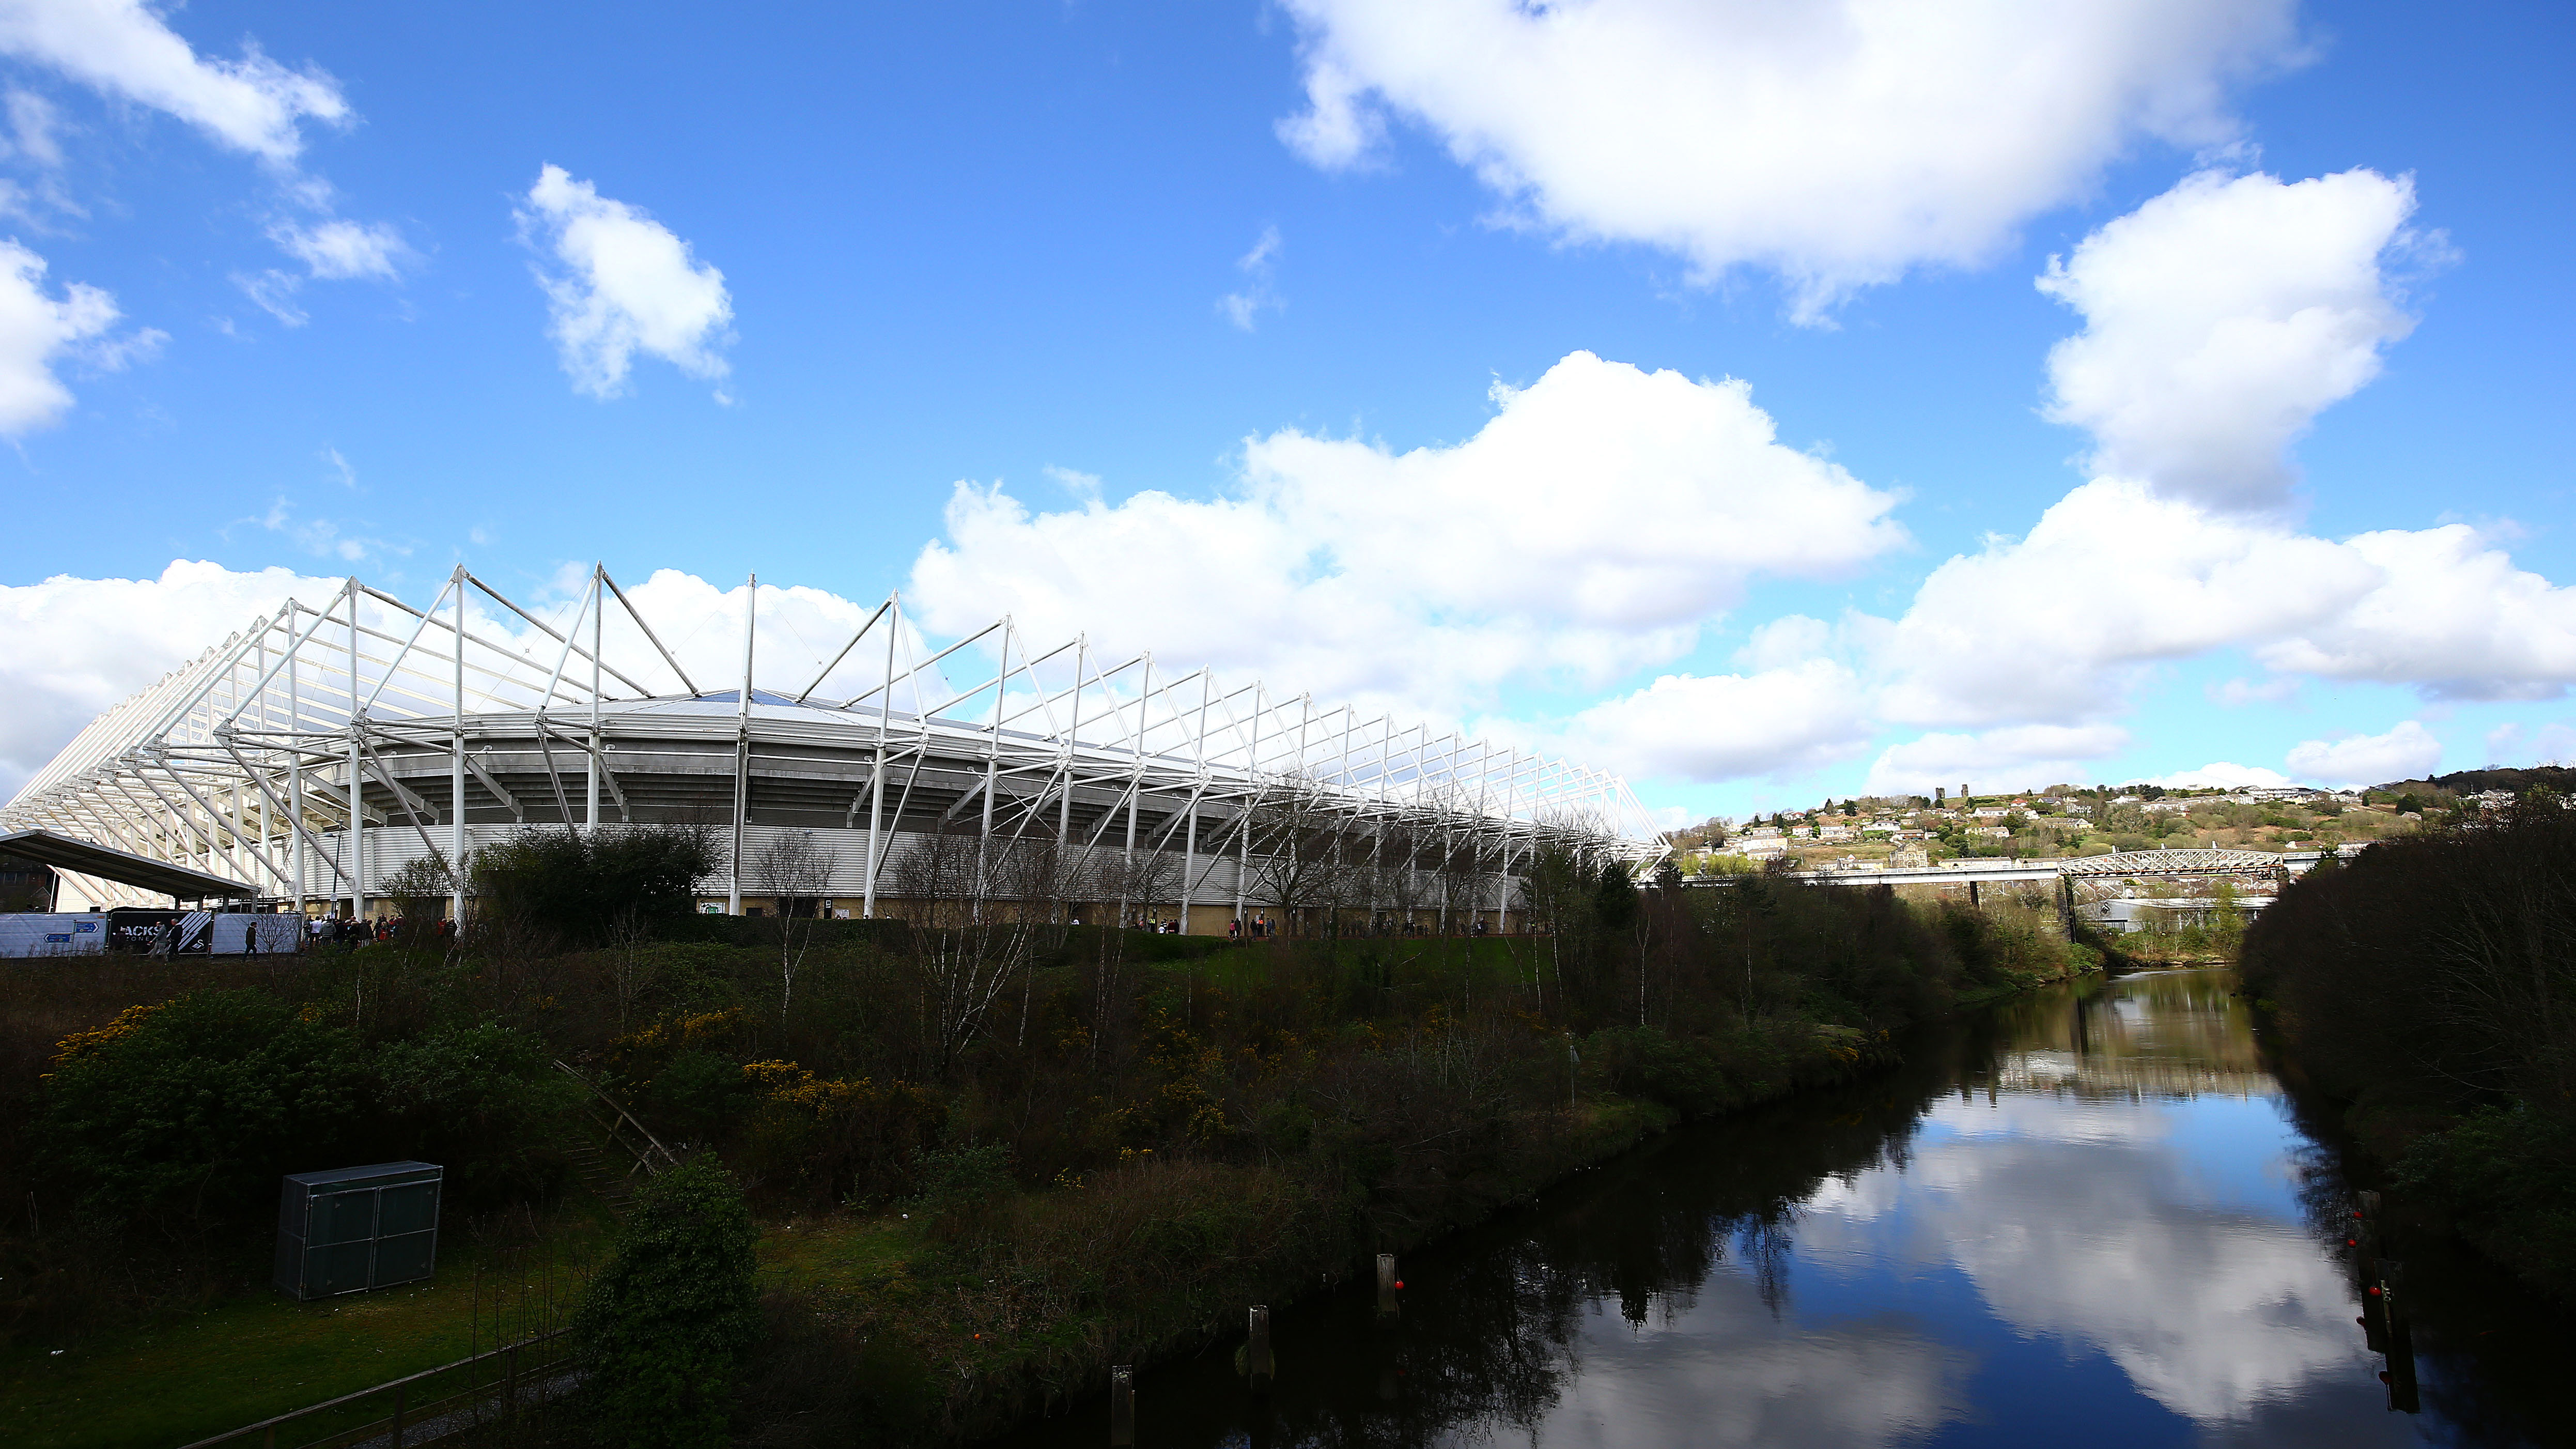 Photo showing Swansea.com Stadium by the river